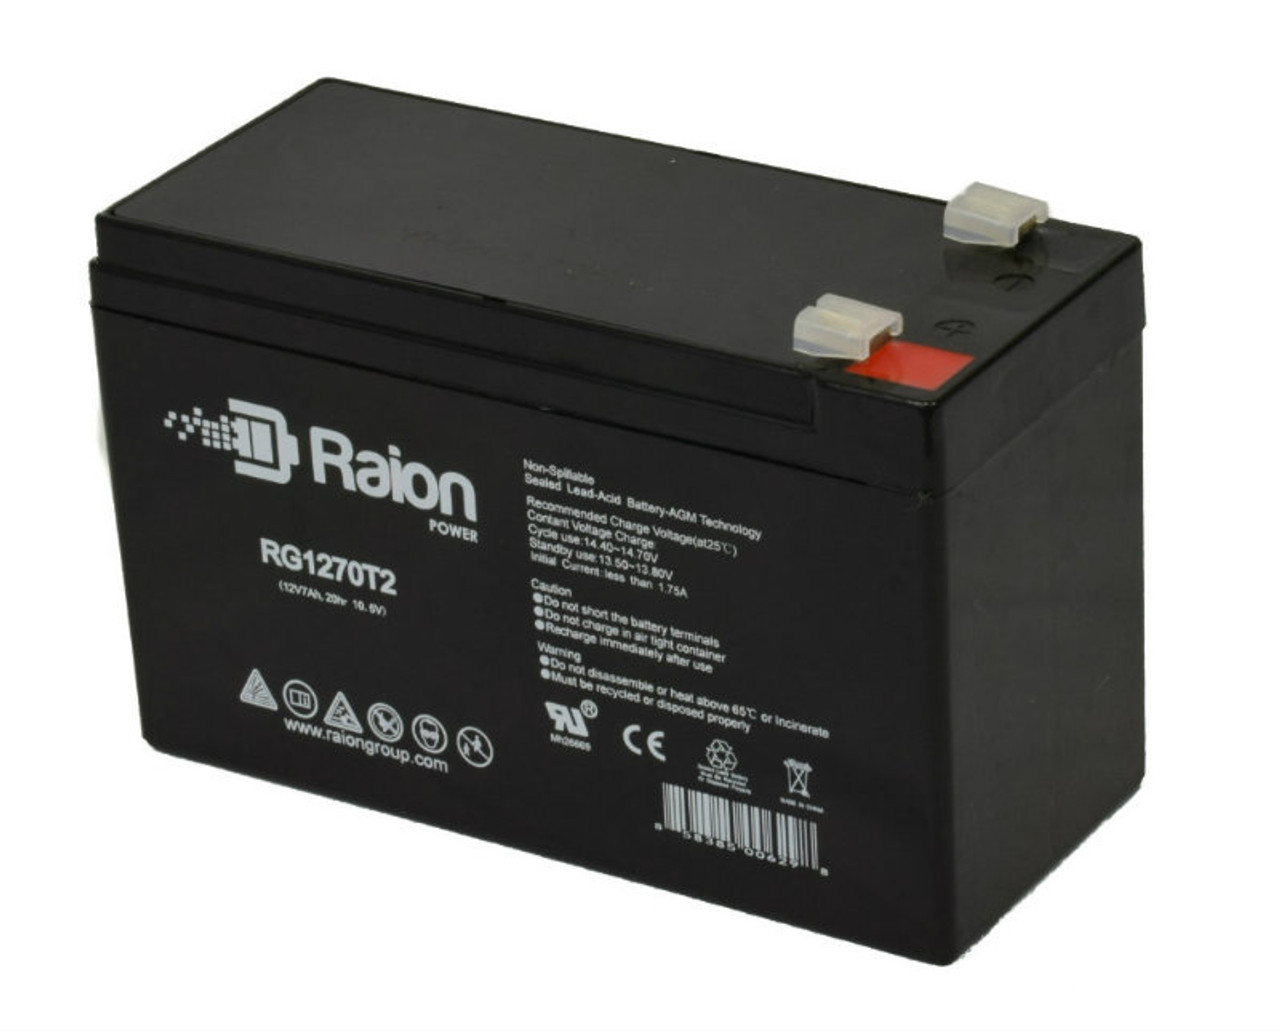 Raion Power RG1270T1 12V 7Ah Non-Spillable Replacement Battery for Power Patrol SLA1270